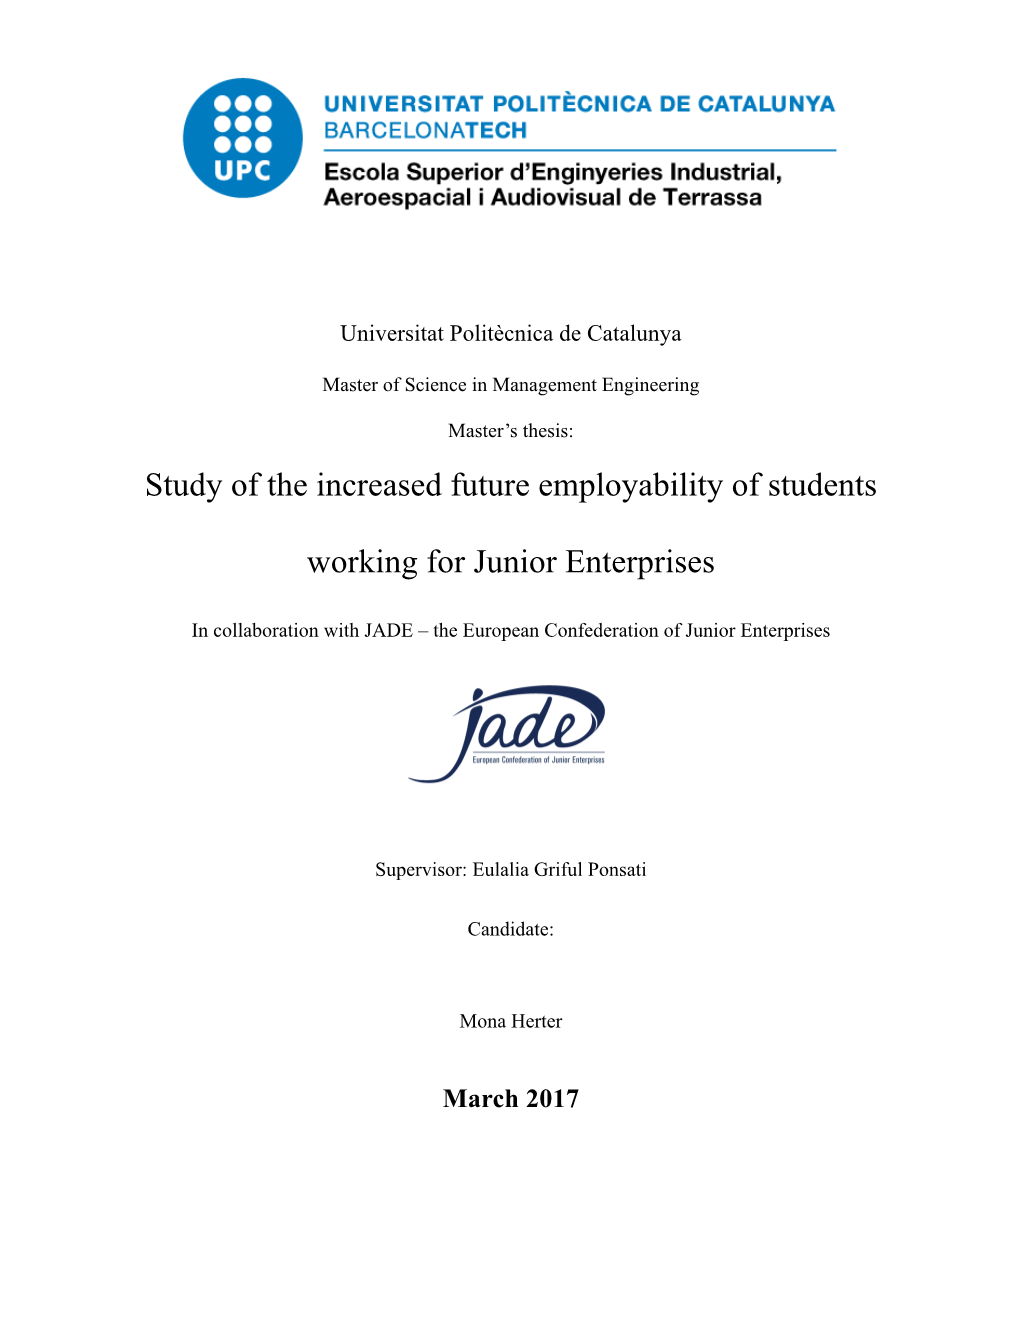 Study of the Increased Future Employability of Students Working for Junior Enterprises